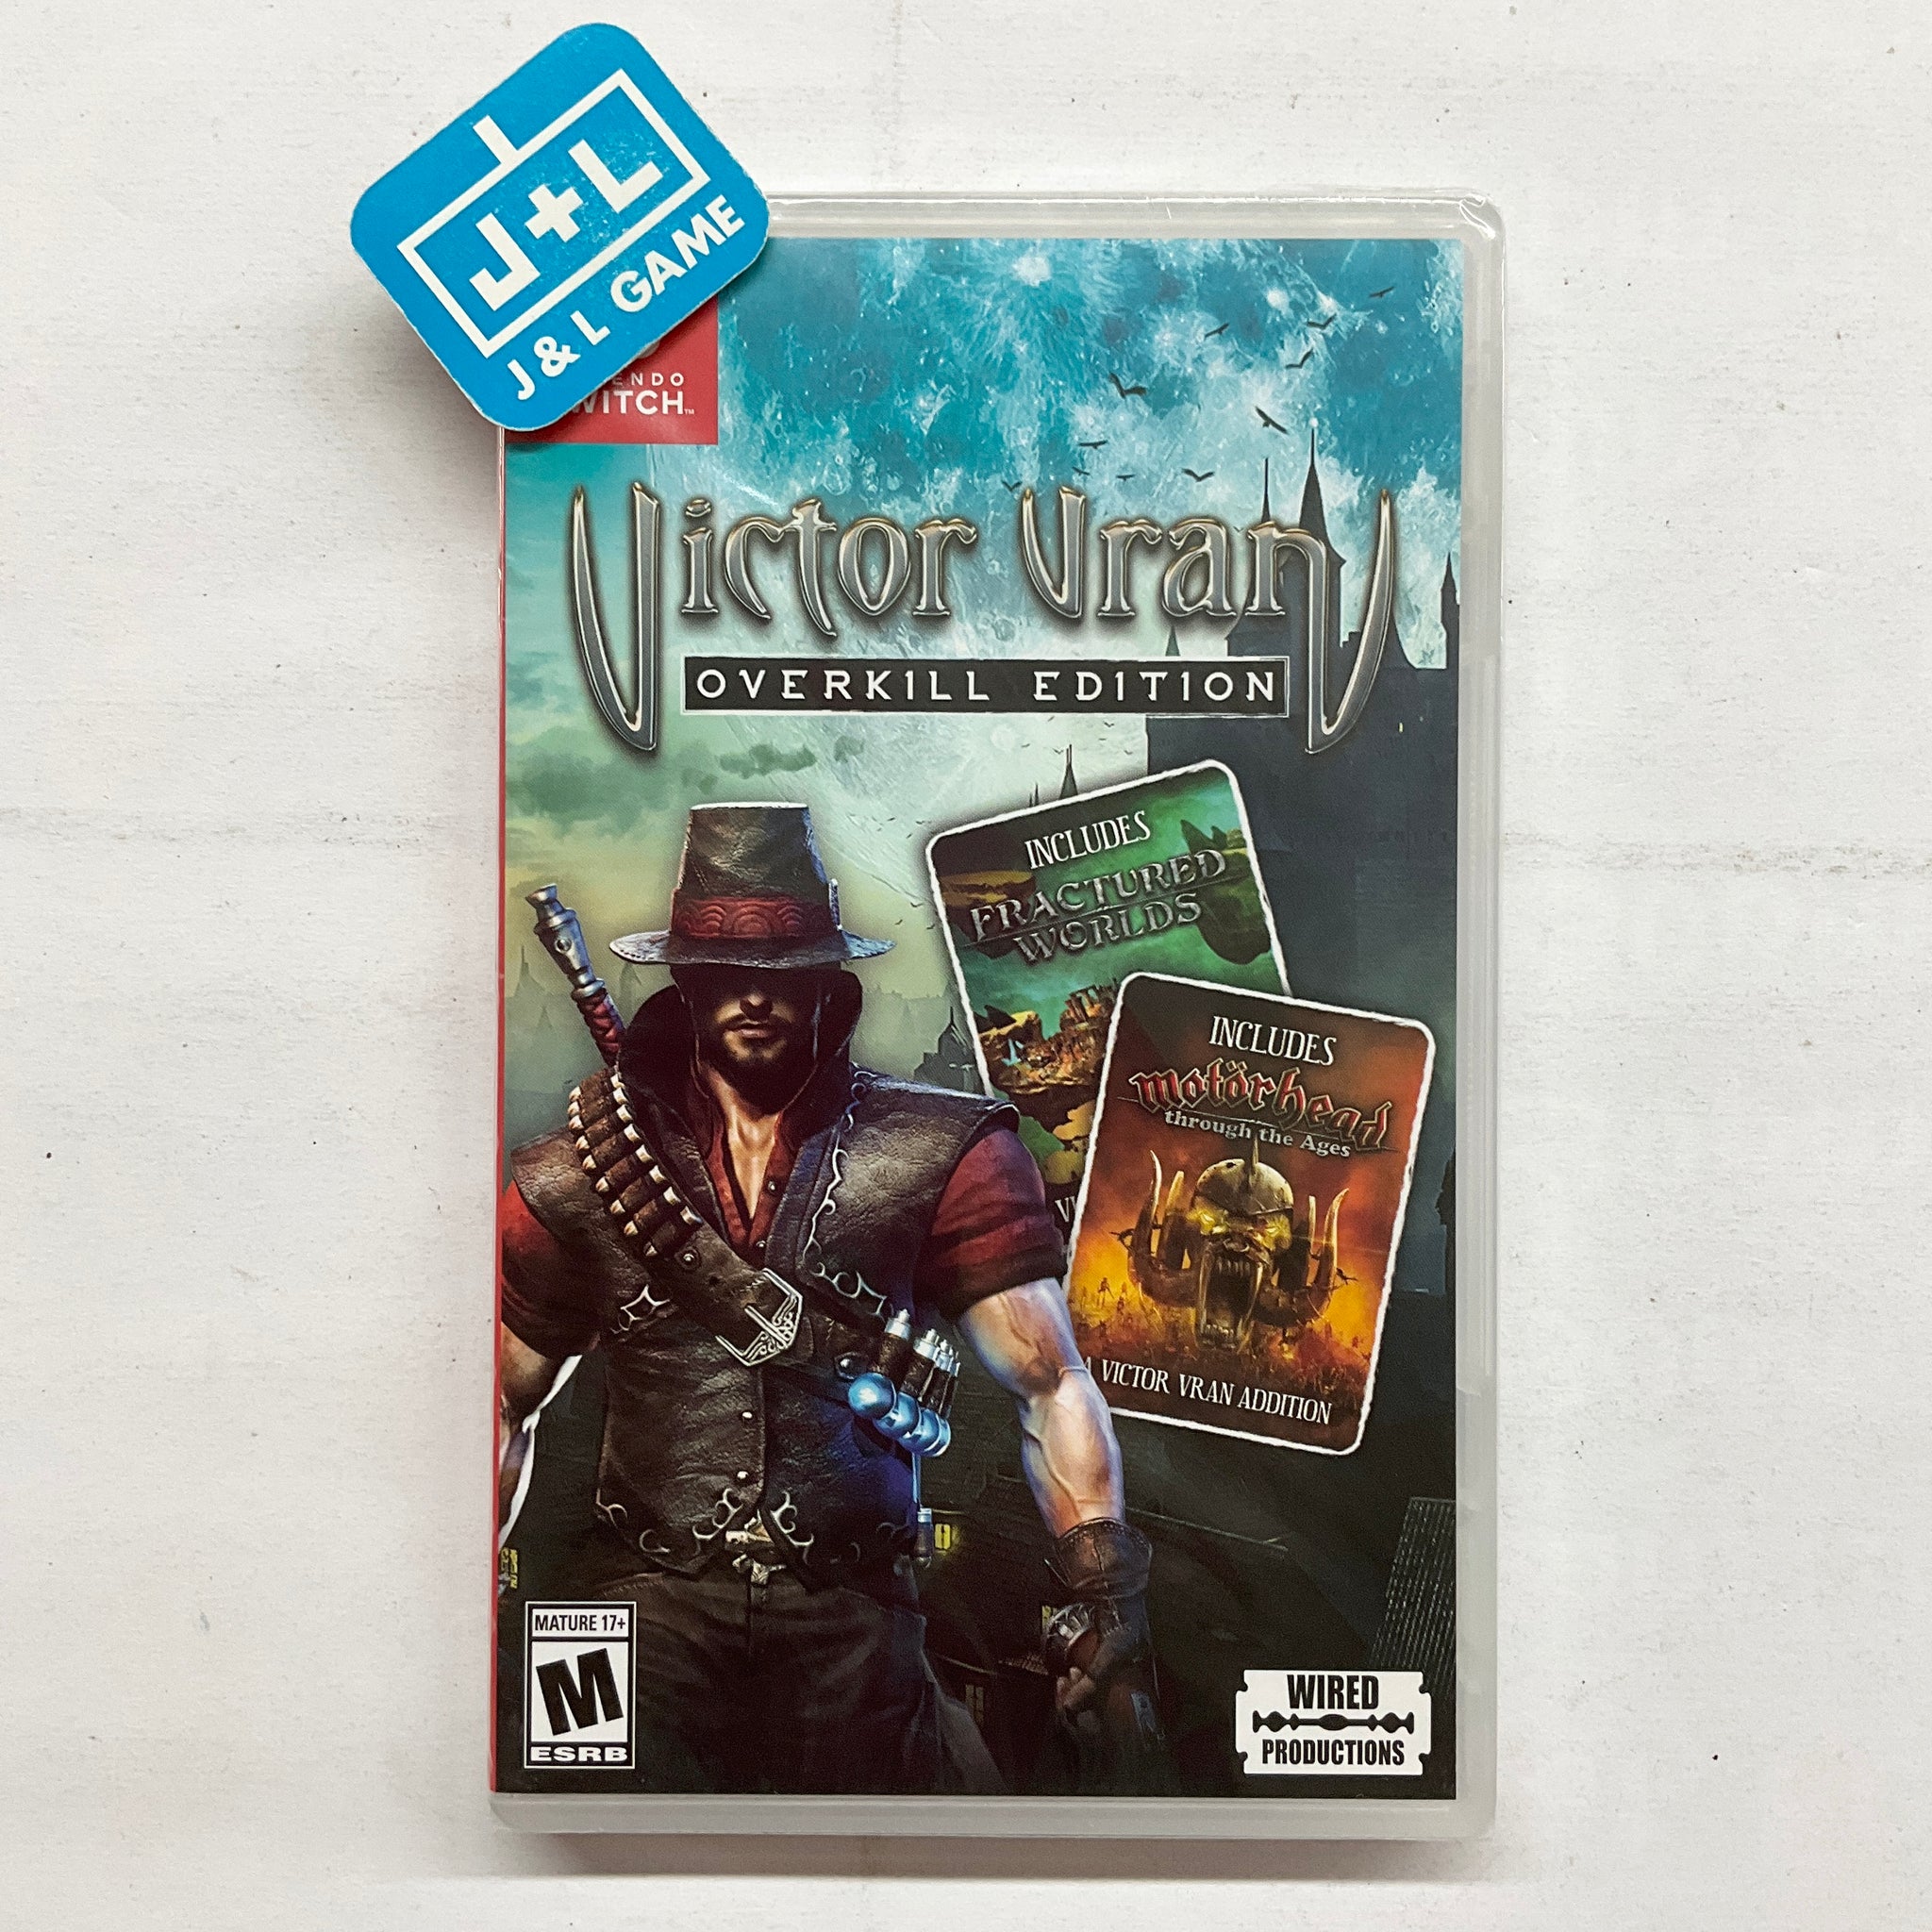 Victor Vran: Overkill Edition - (NSW) Nintendo Switch Video Games Wired Productions   